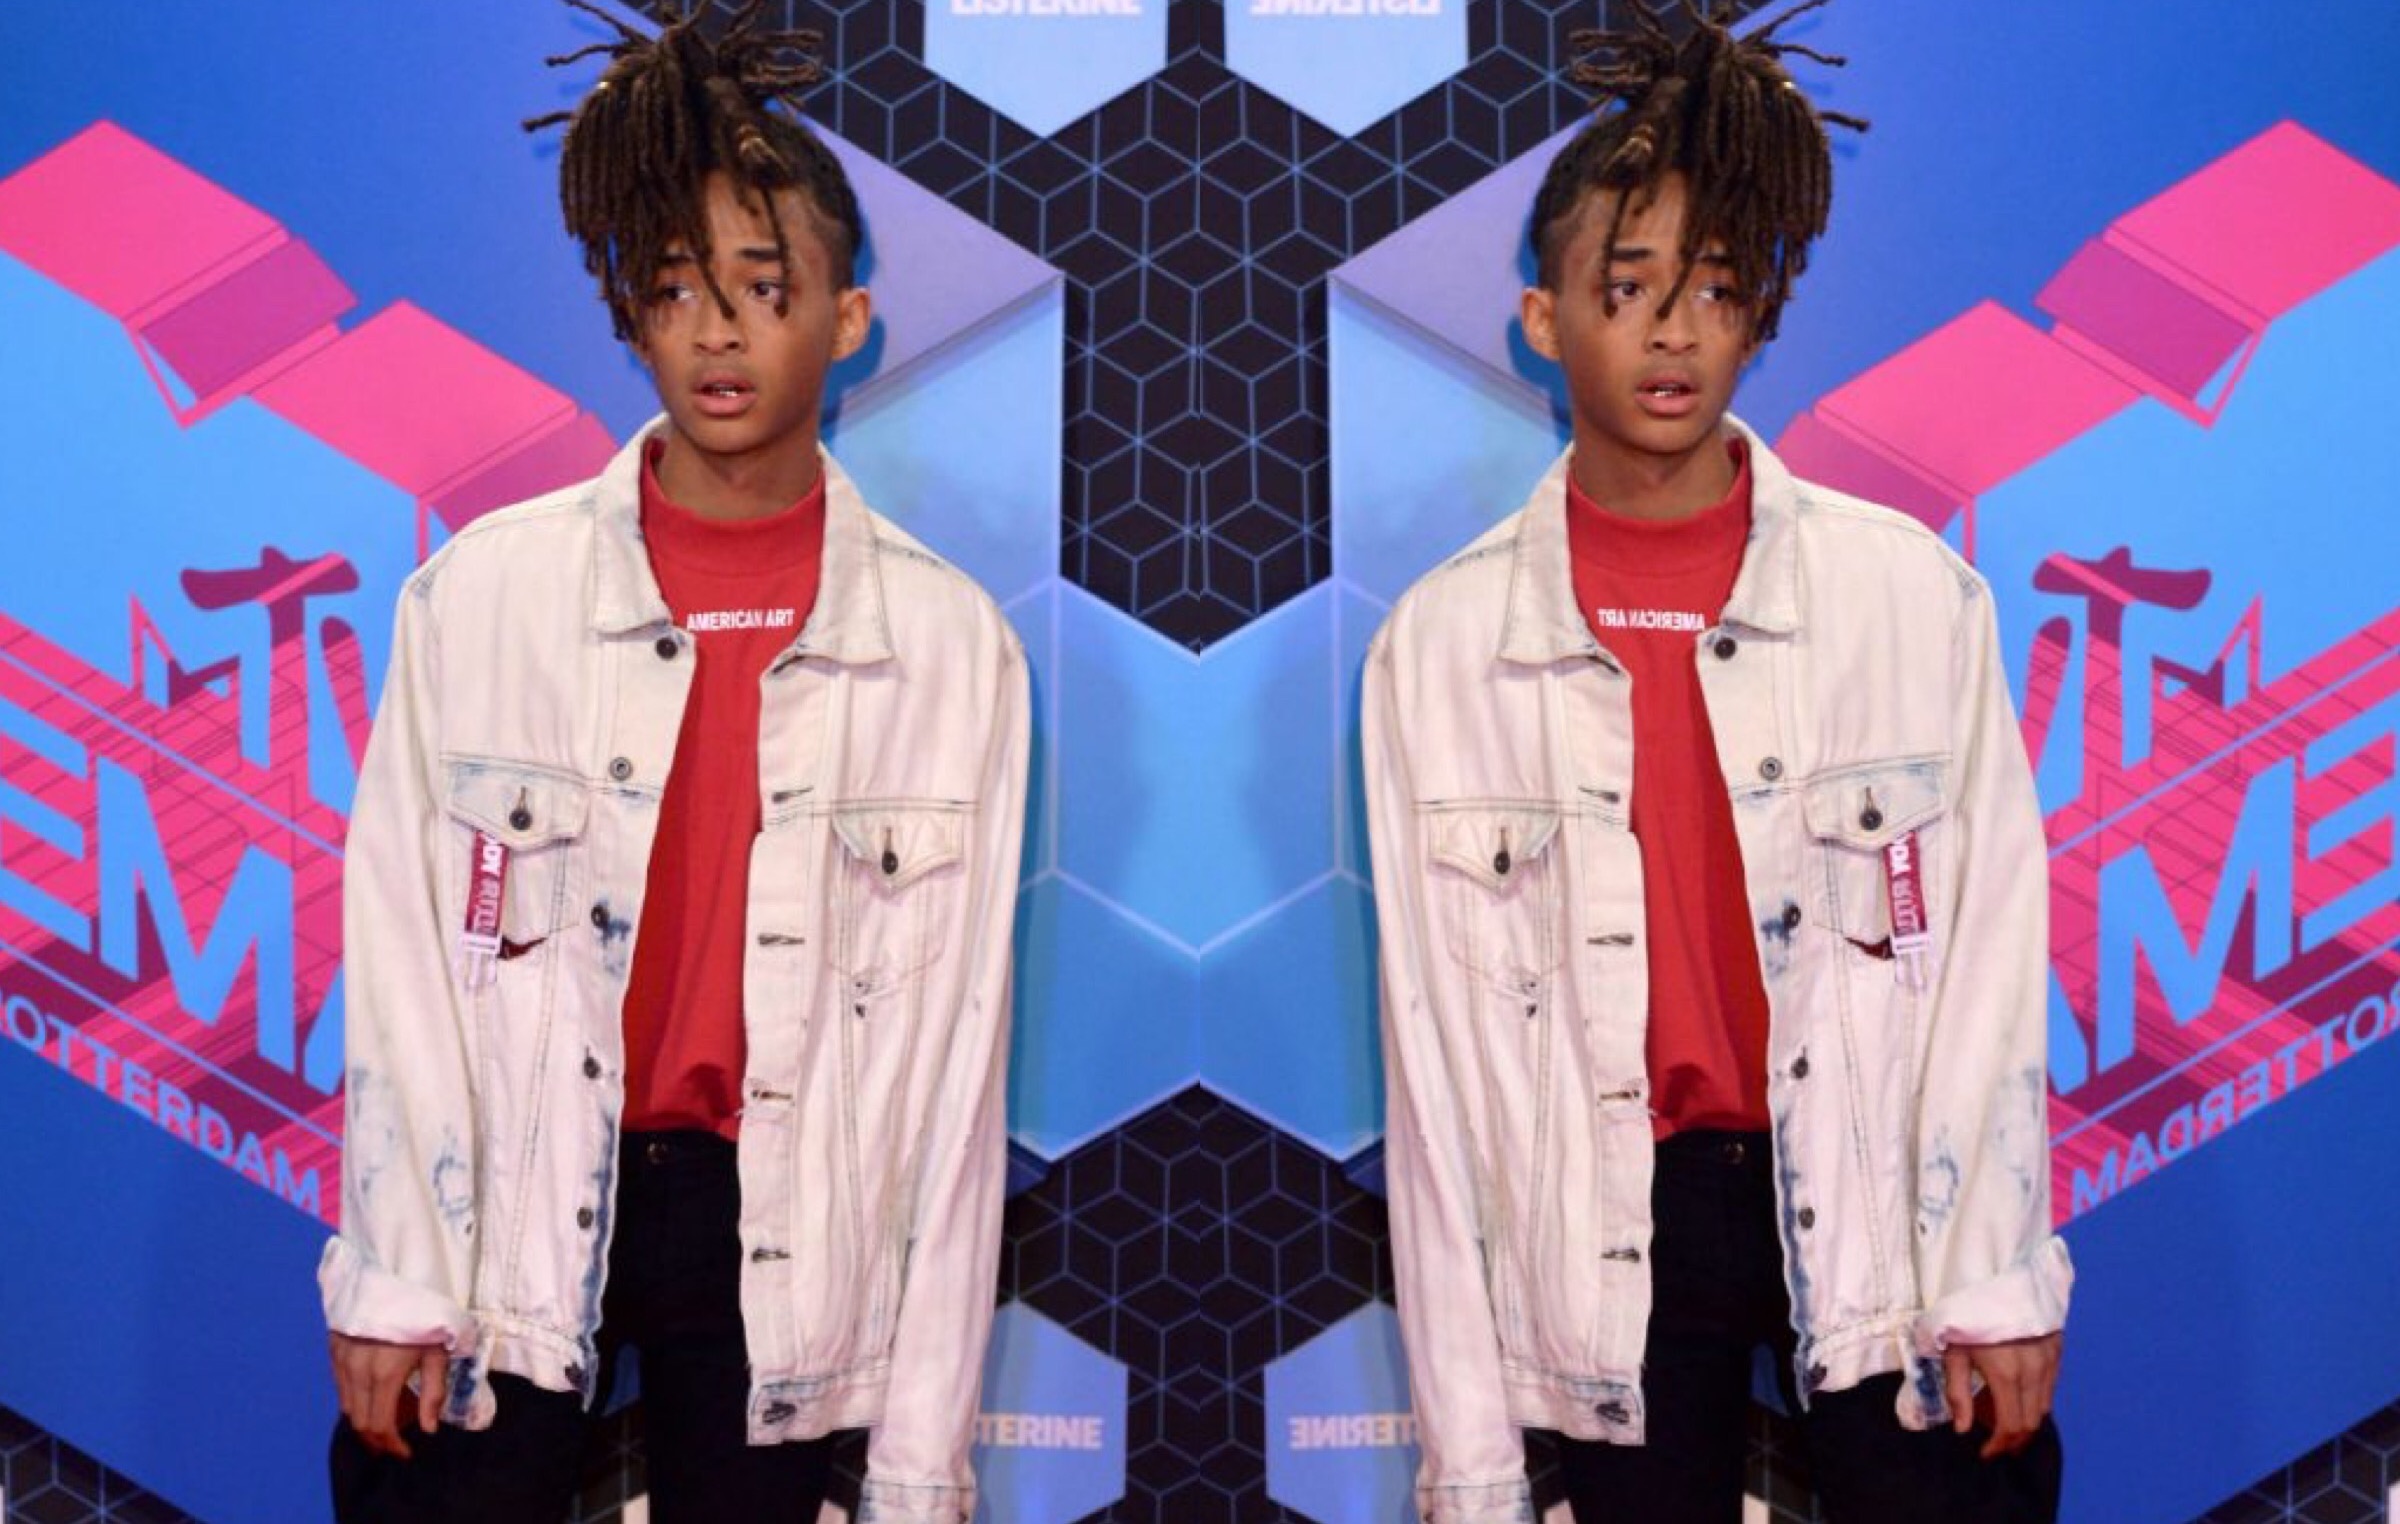 Get The Look: Jaden Smith In The Incorporated & Puma Sneakers